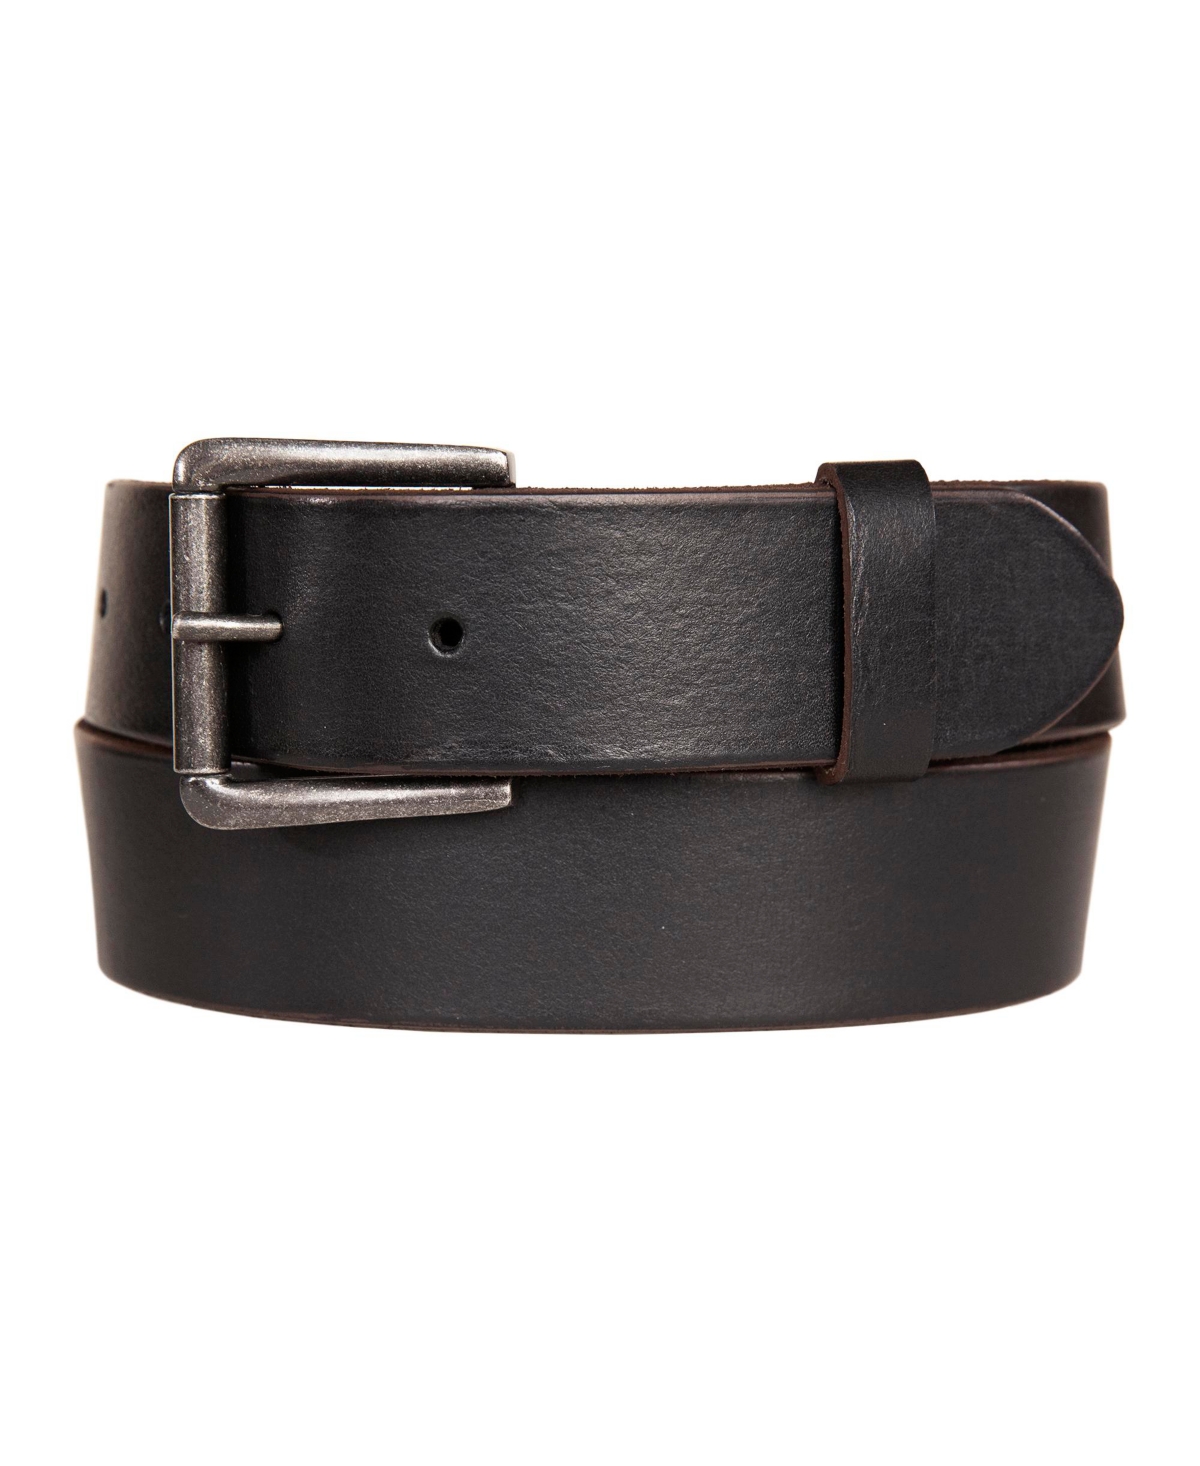 Men's Leather Jean Belt with Roller Buckle and Rivets - Black